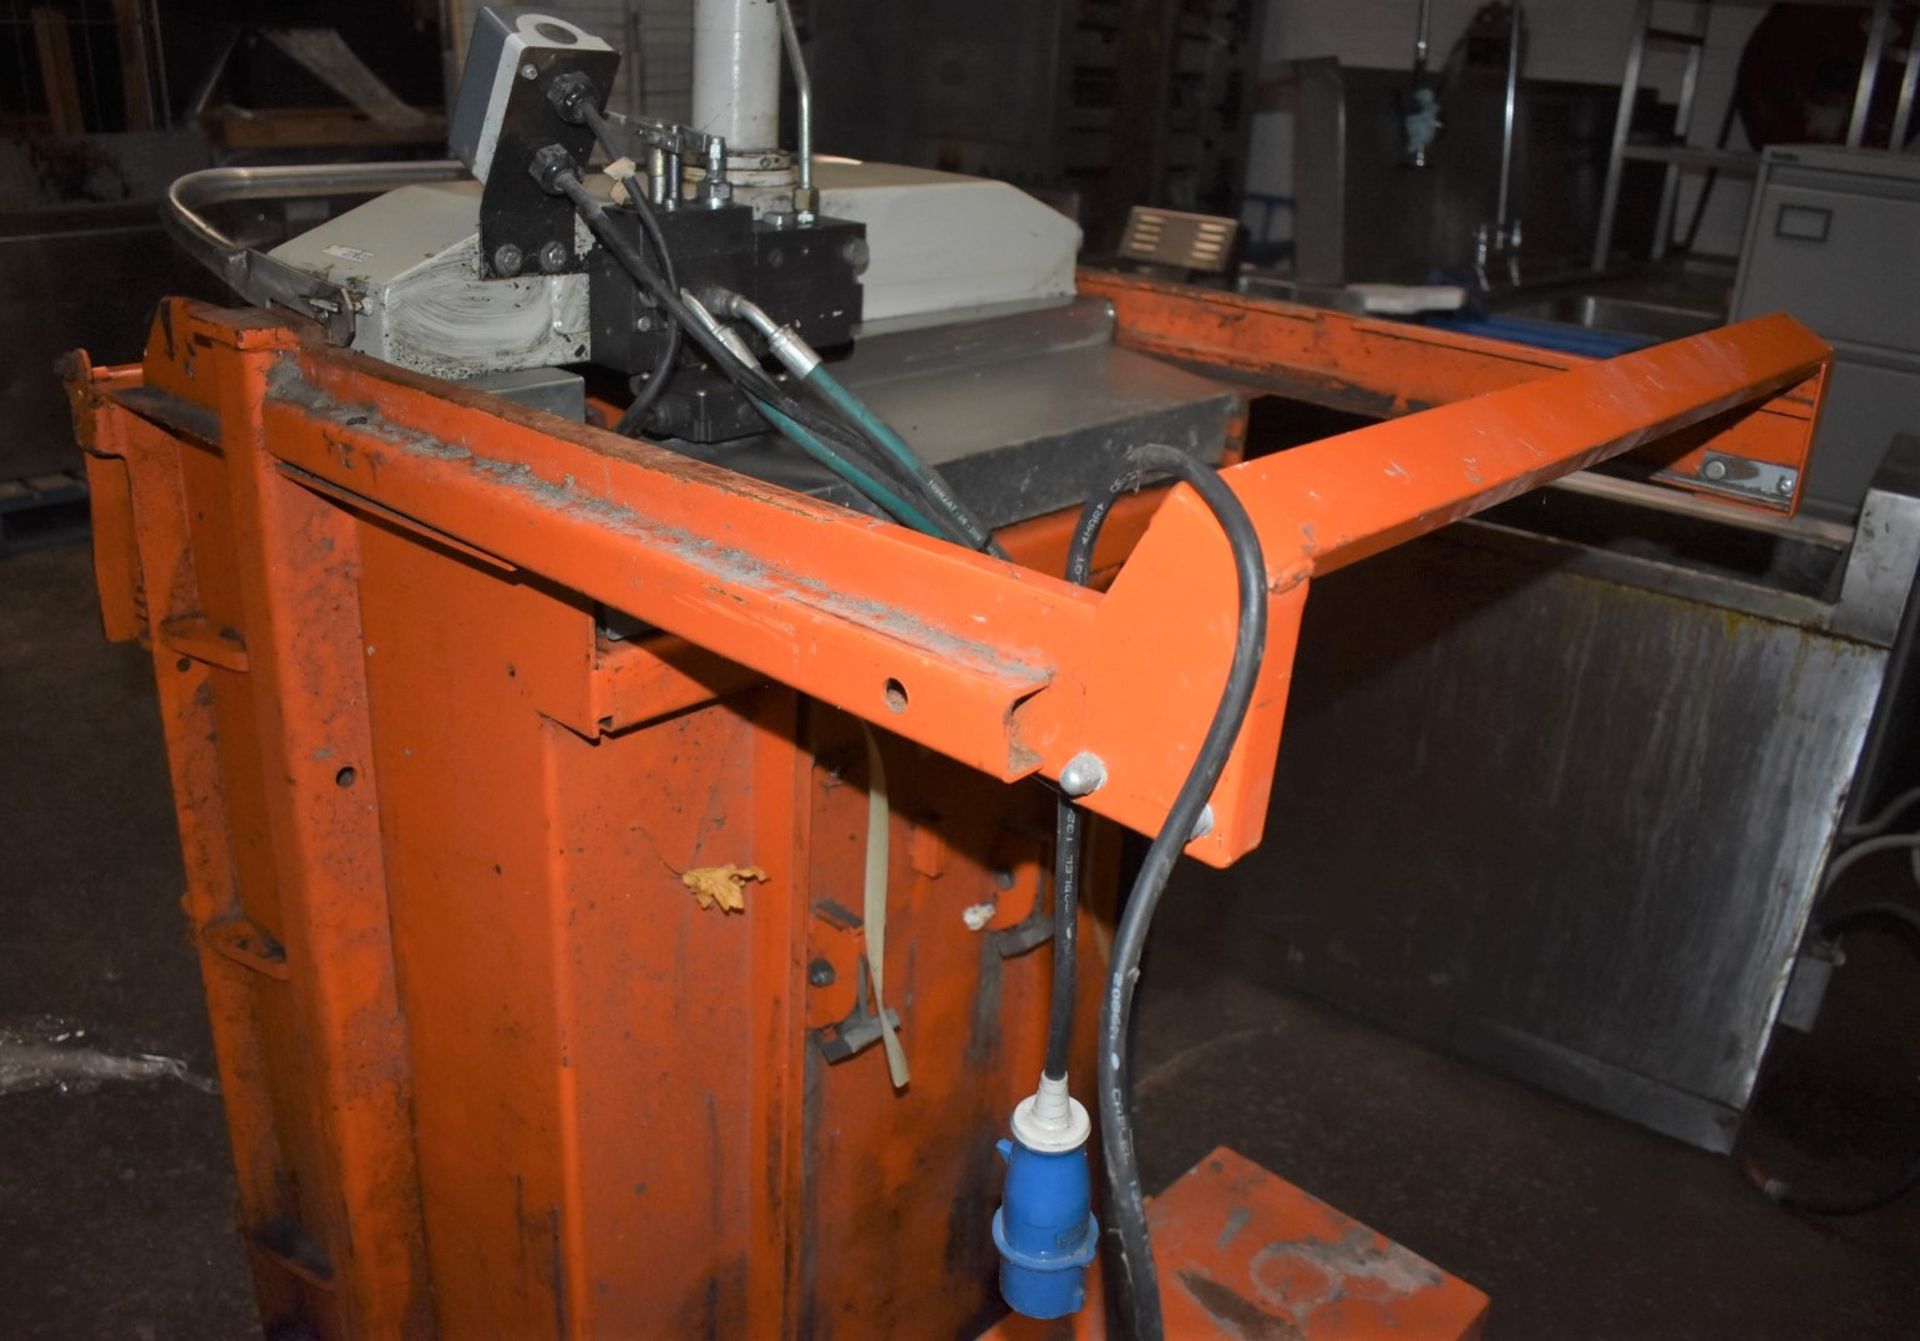 1 x Orwak 5010 Hydraulic Press Compact Cardboard Baler - Used For Compacting Recyclable or Non- - Image 2 of 15